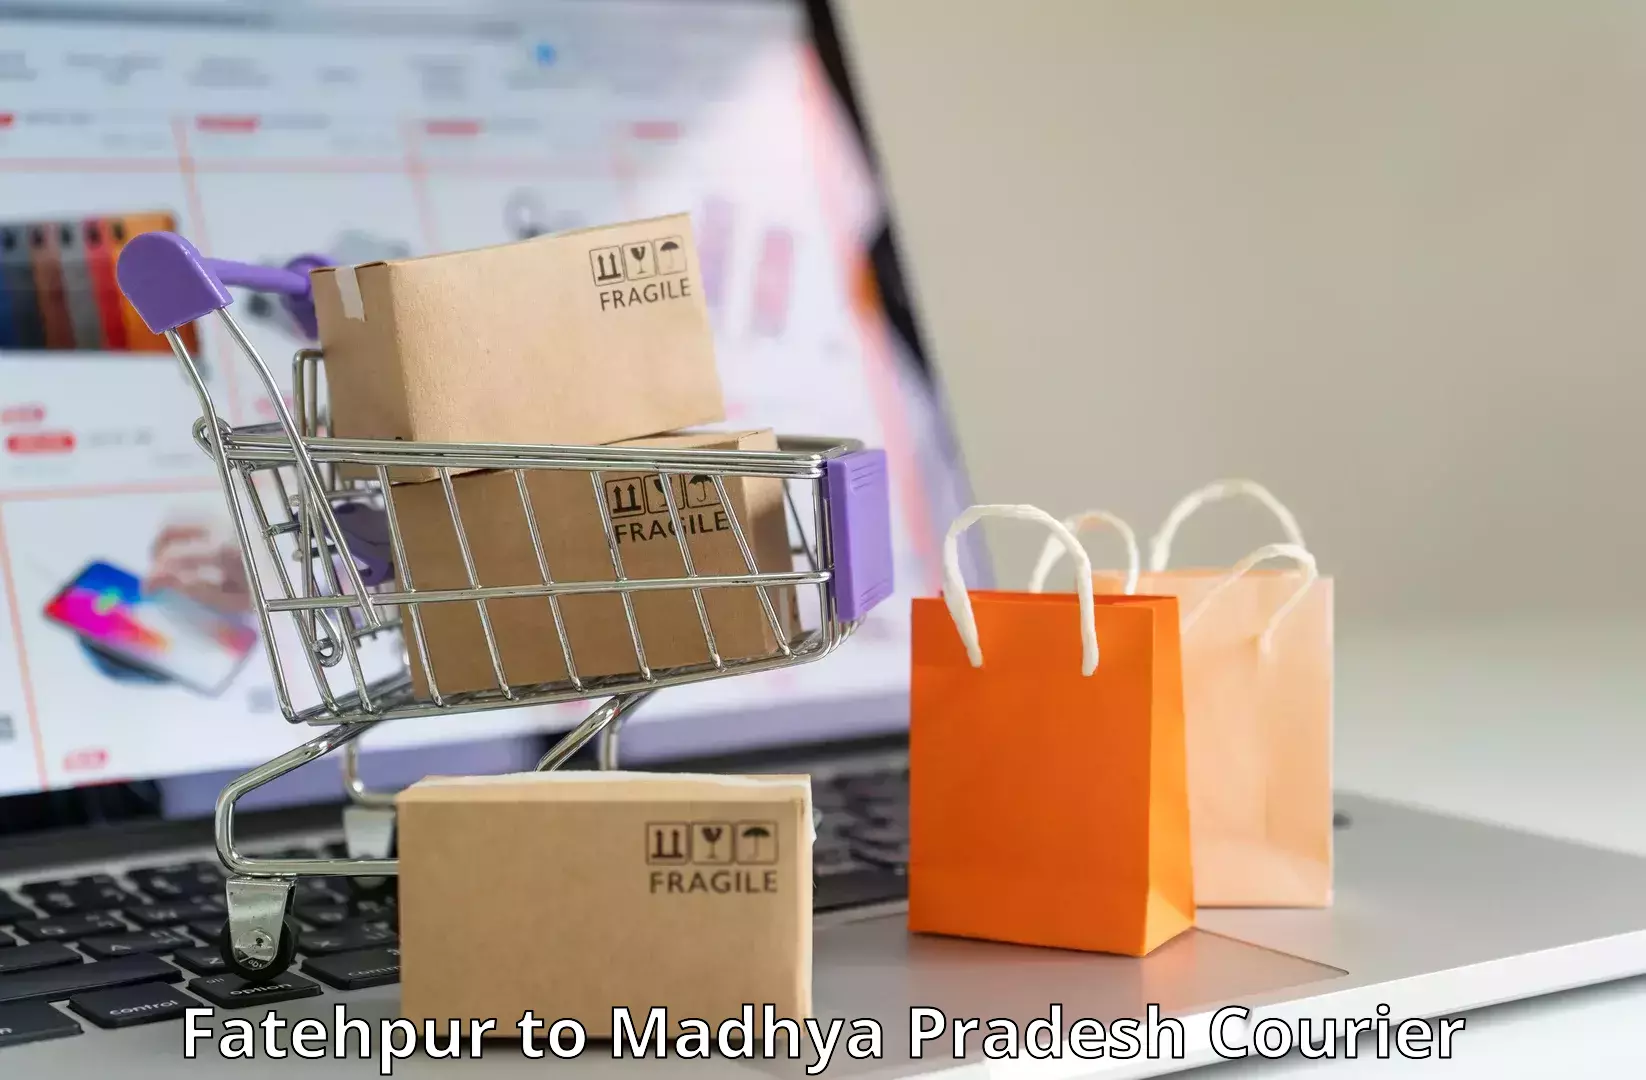 Weekend courier service in Fatehpur to Chand Chaurai